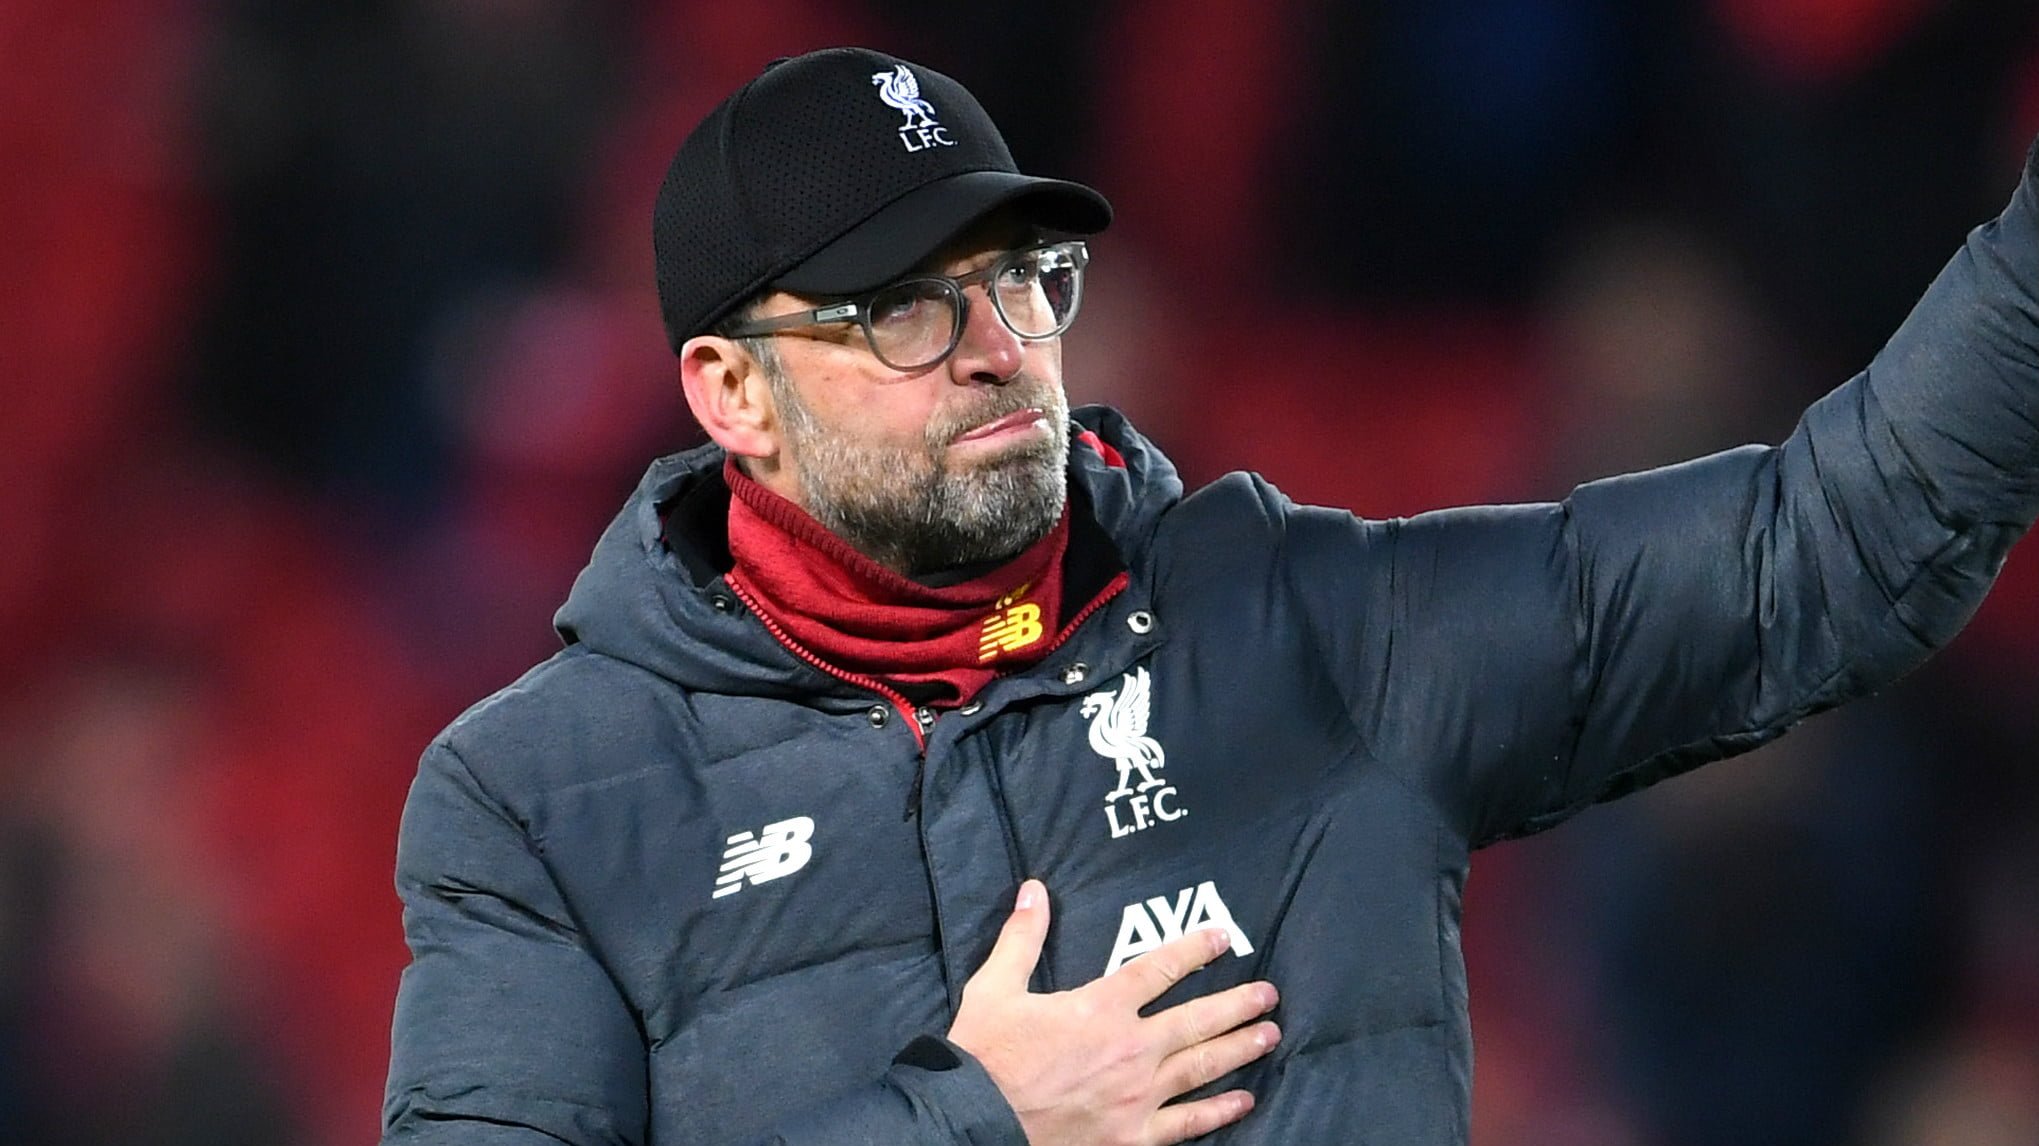 UCL: Klopp to be without five key players for Liverpool, Porto clash